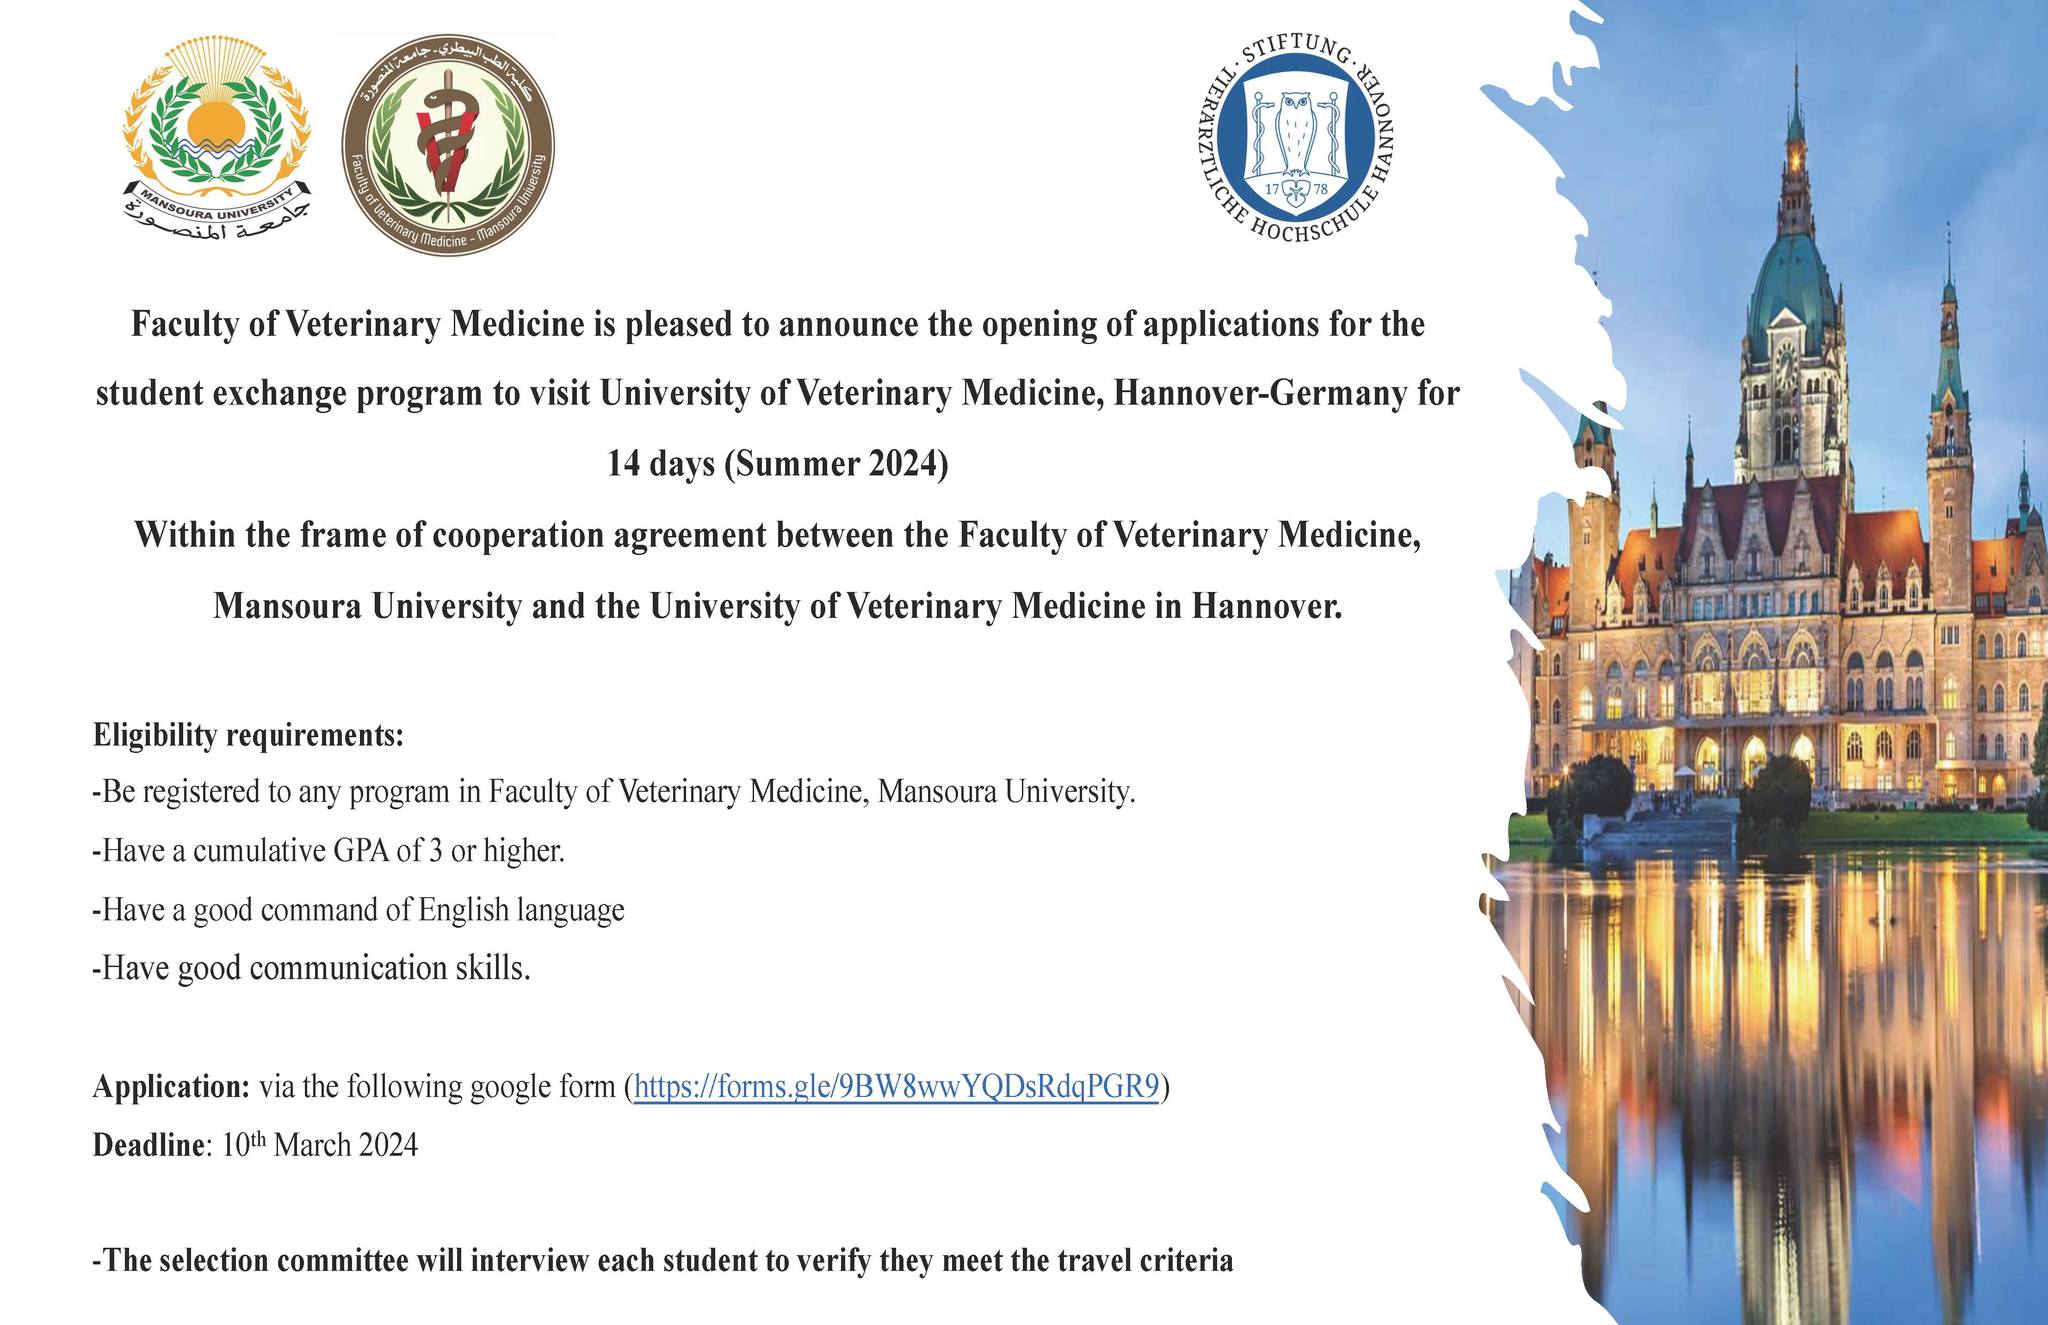 The opening of application for the student exchange progaram to visit university of Veterinary Medicine, Hannover Germany 